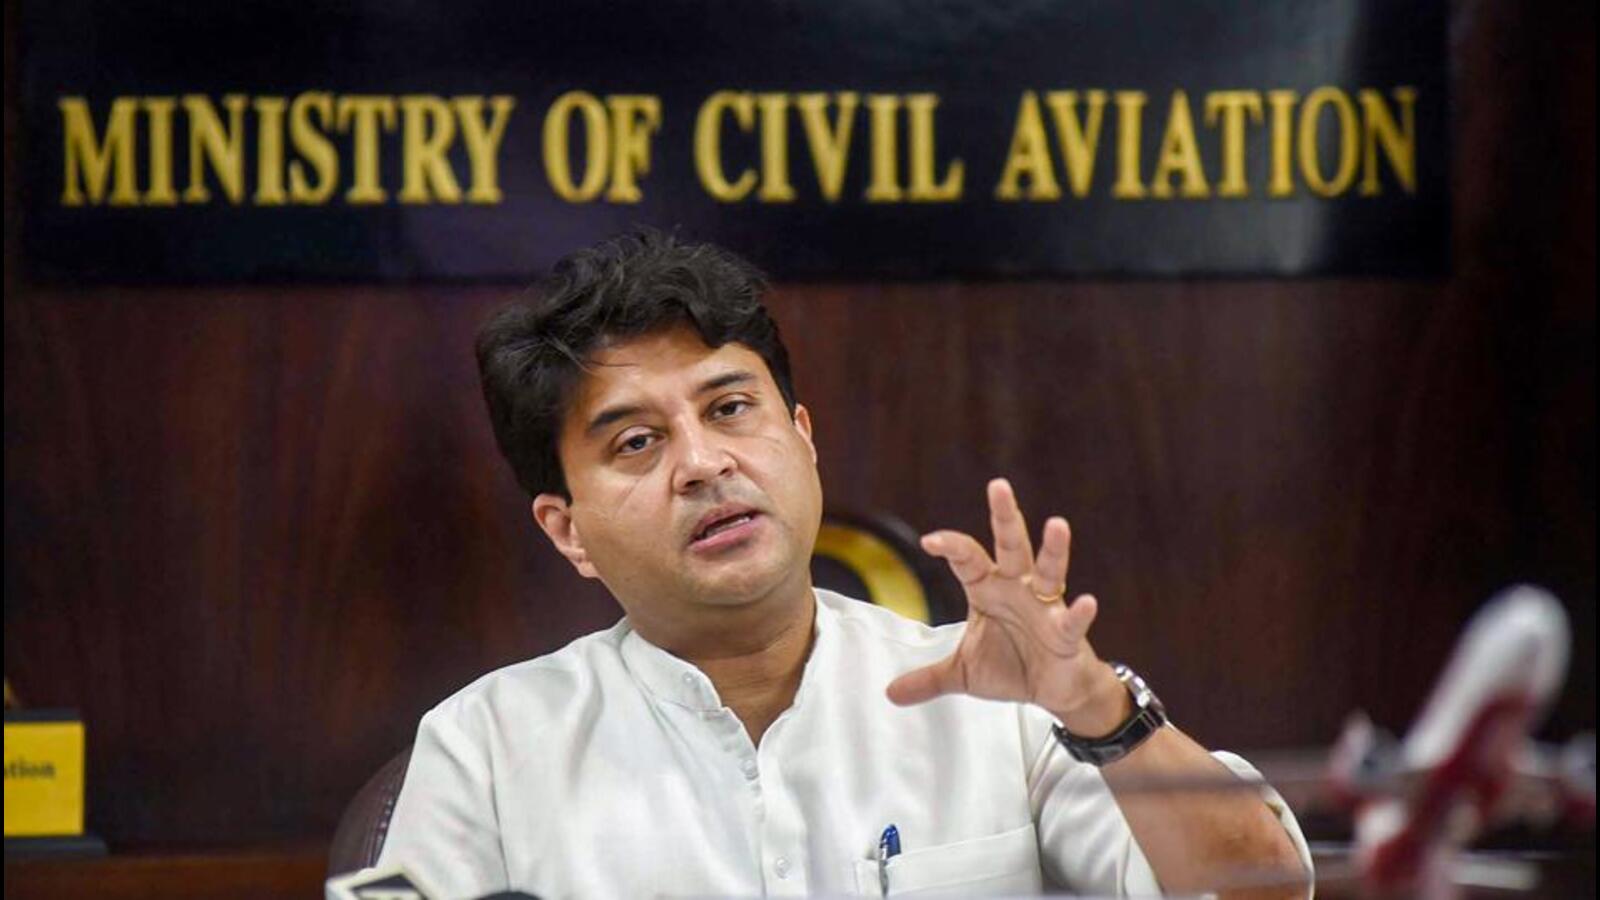 A Bright Future for Aspiring Aviators: Indian Fleet Size to Expand from 700 to 1500 by 2028 -  Said Jyotiraditya Scindia